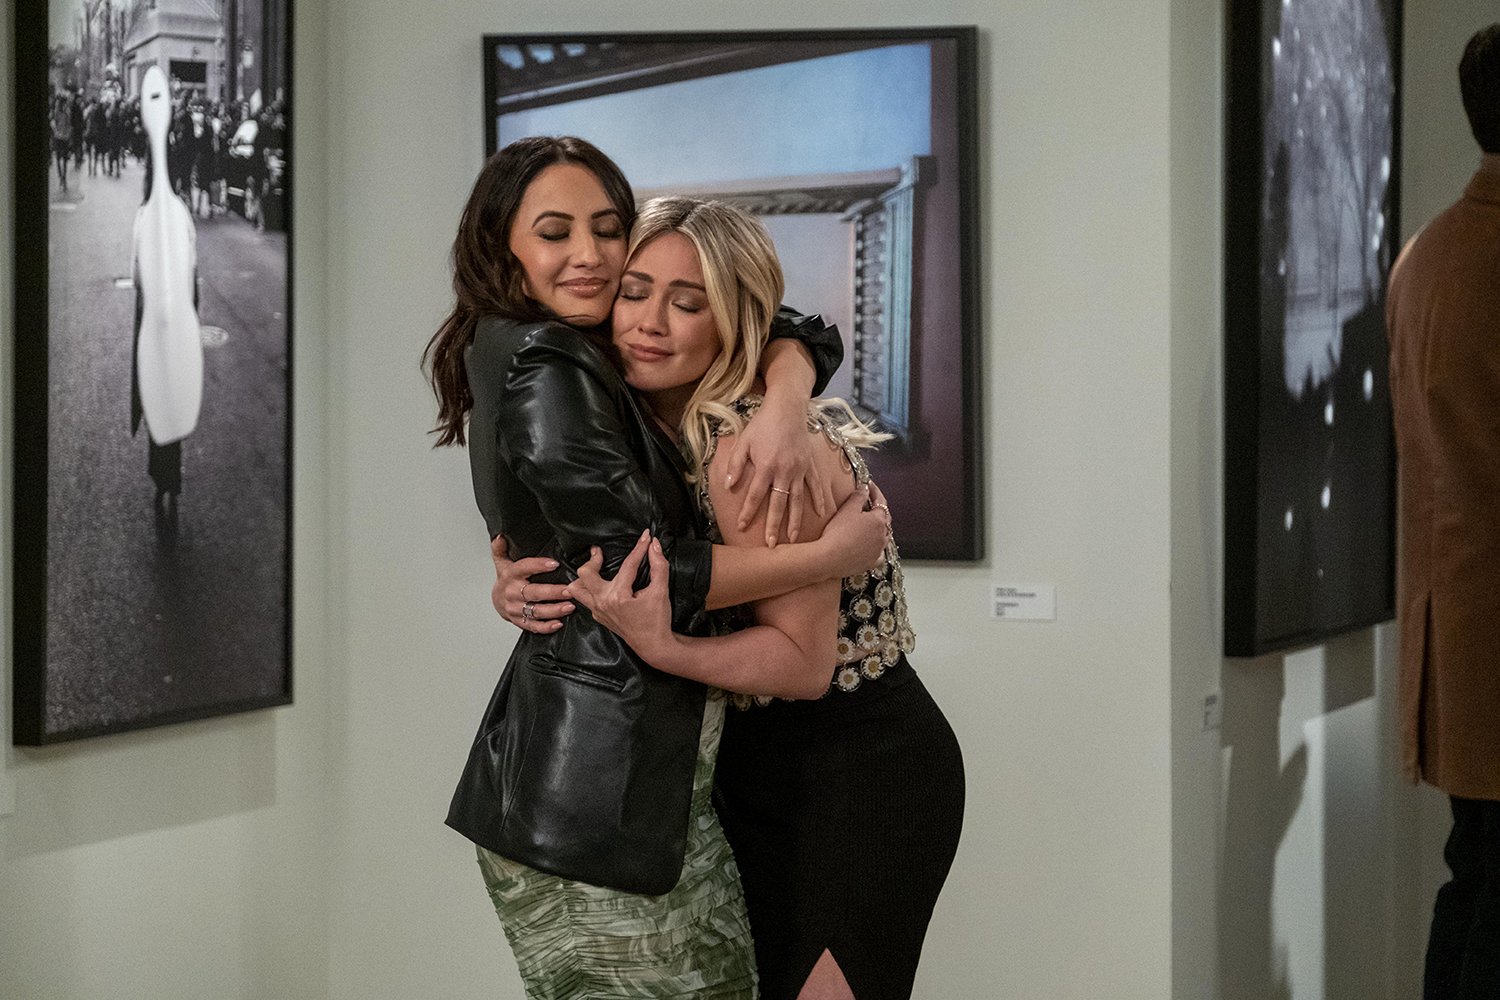 How I Met Your Father Season 1: Francia Raisa as Valentina and Hilary Duff as Sophie embracing in a hug at an art gallery